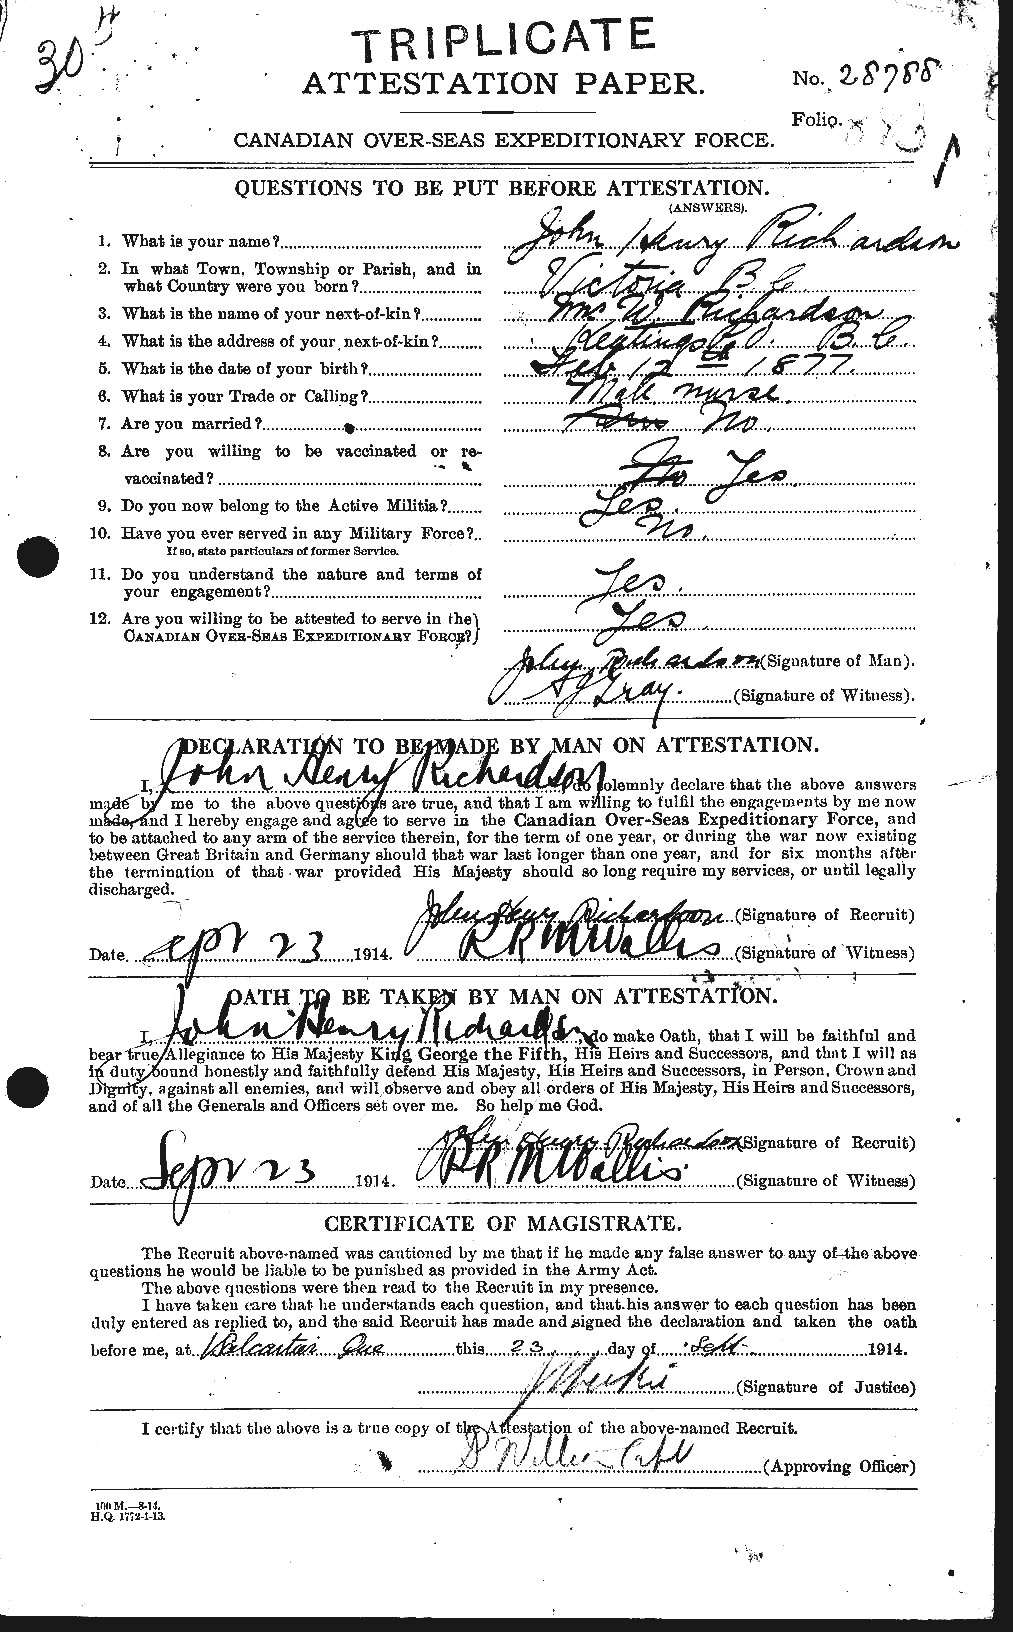 Personnel Records of the First World War - CEF 605061a